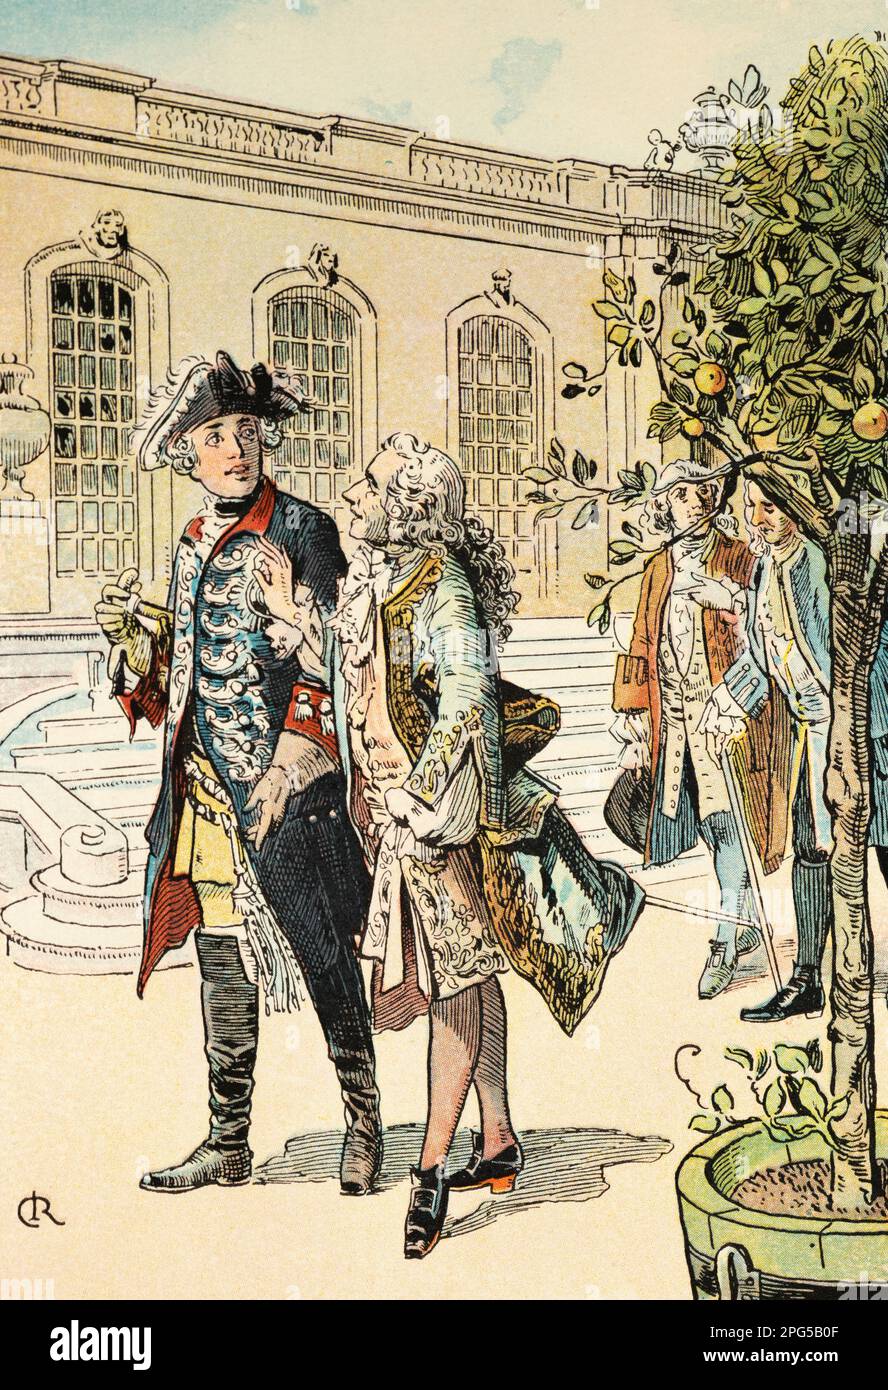 Frederick II the Great talking to phlosopher Voltaire in Sanssouci Castle Gardens, history of the Hohenzollern, Potsdam, Prussia, illustration 1899 Stock Photo